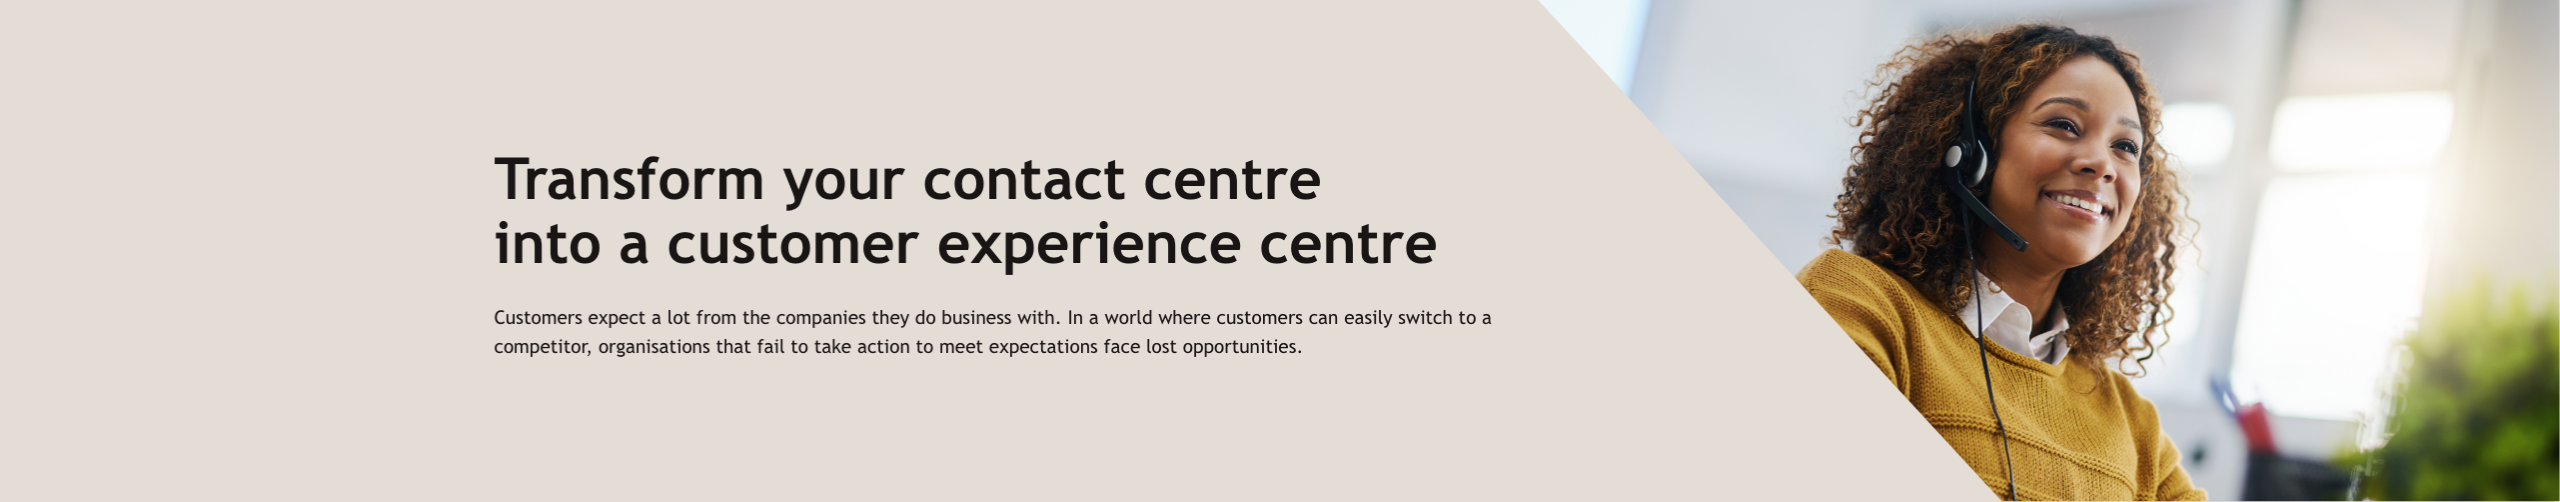 Contact Center Automation Banner Image